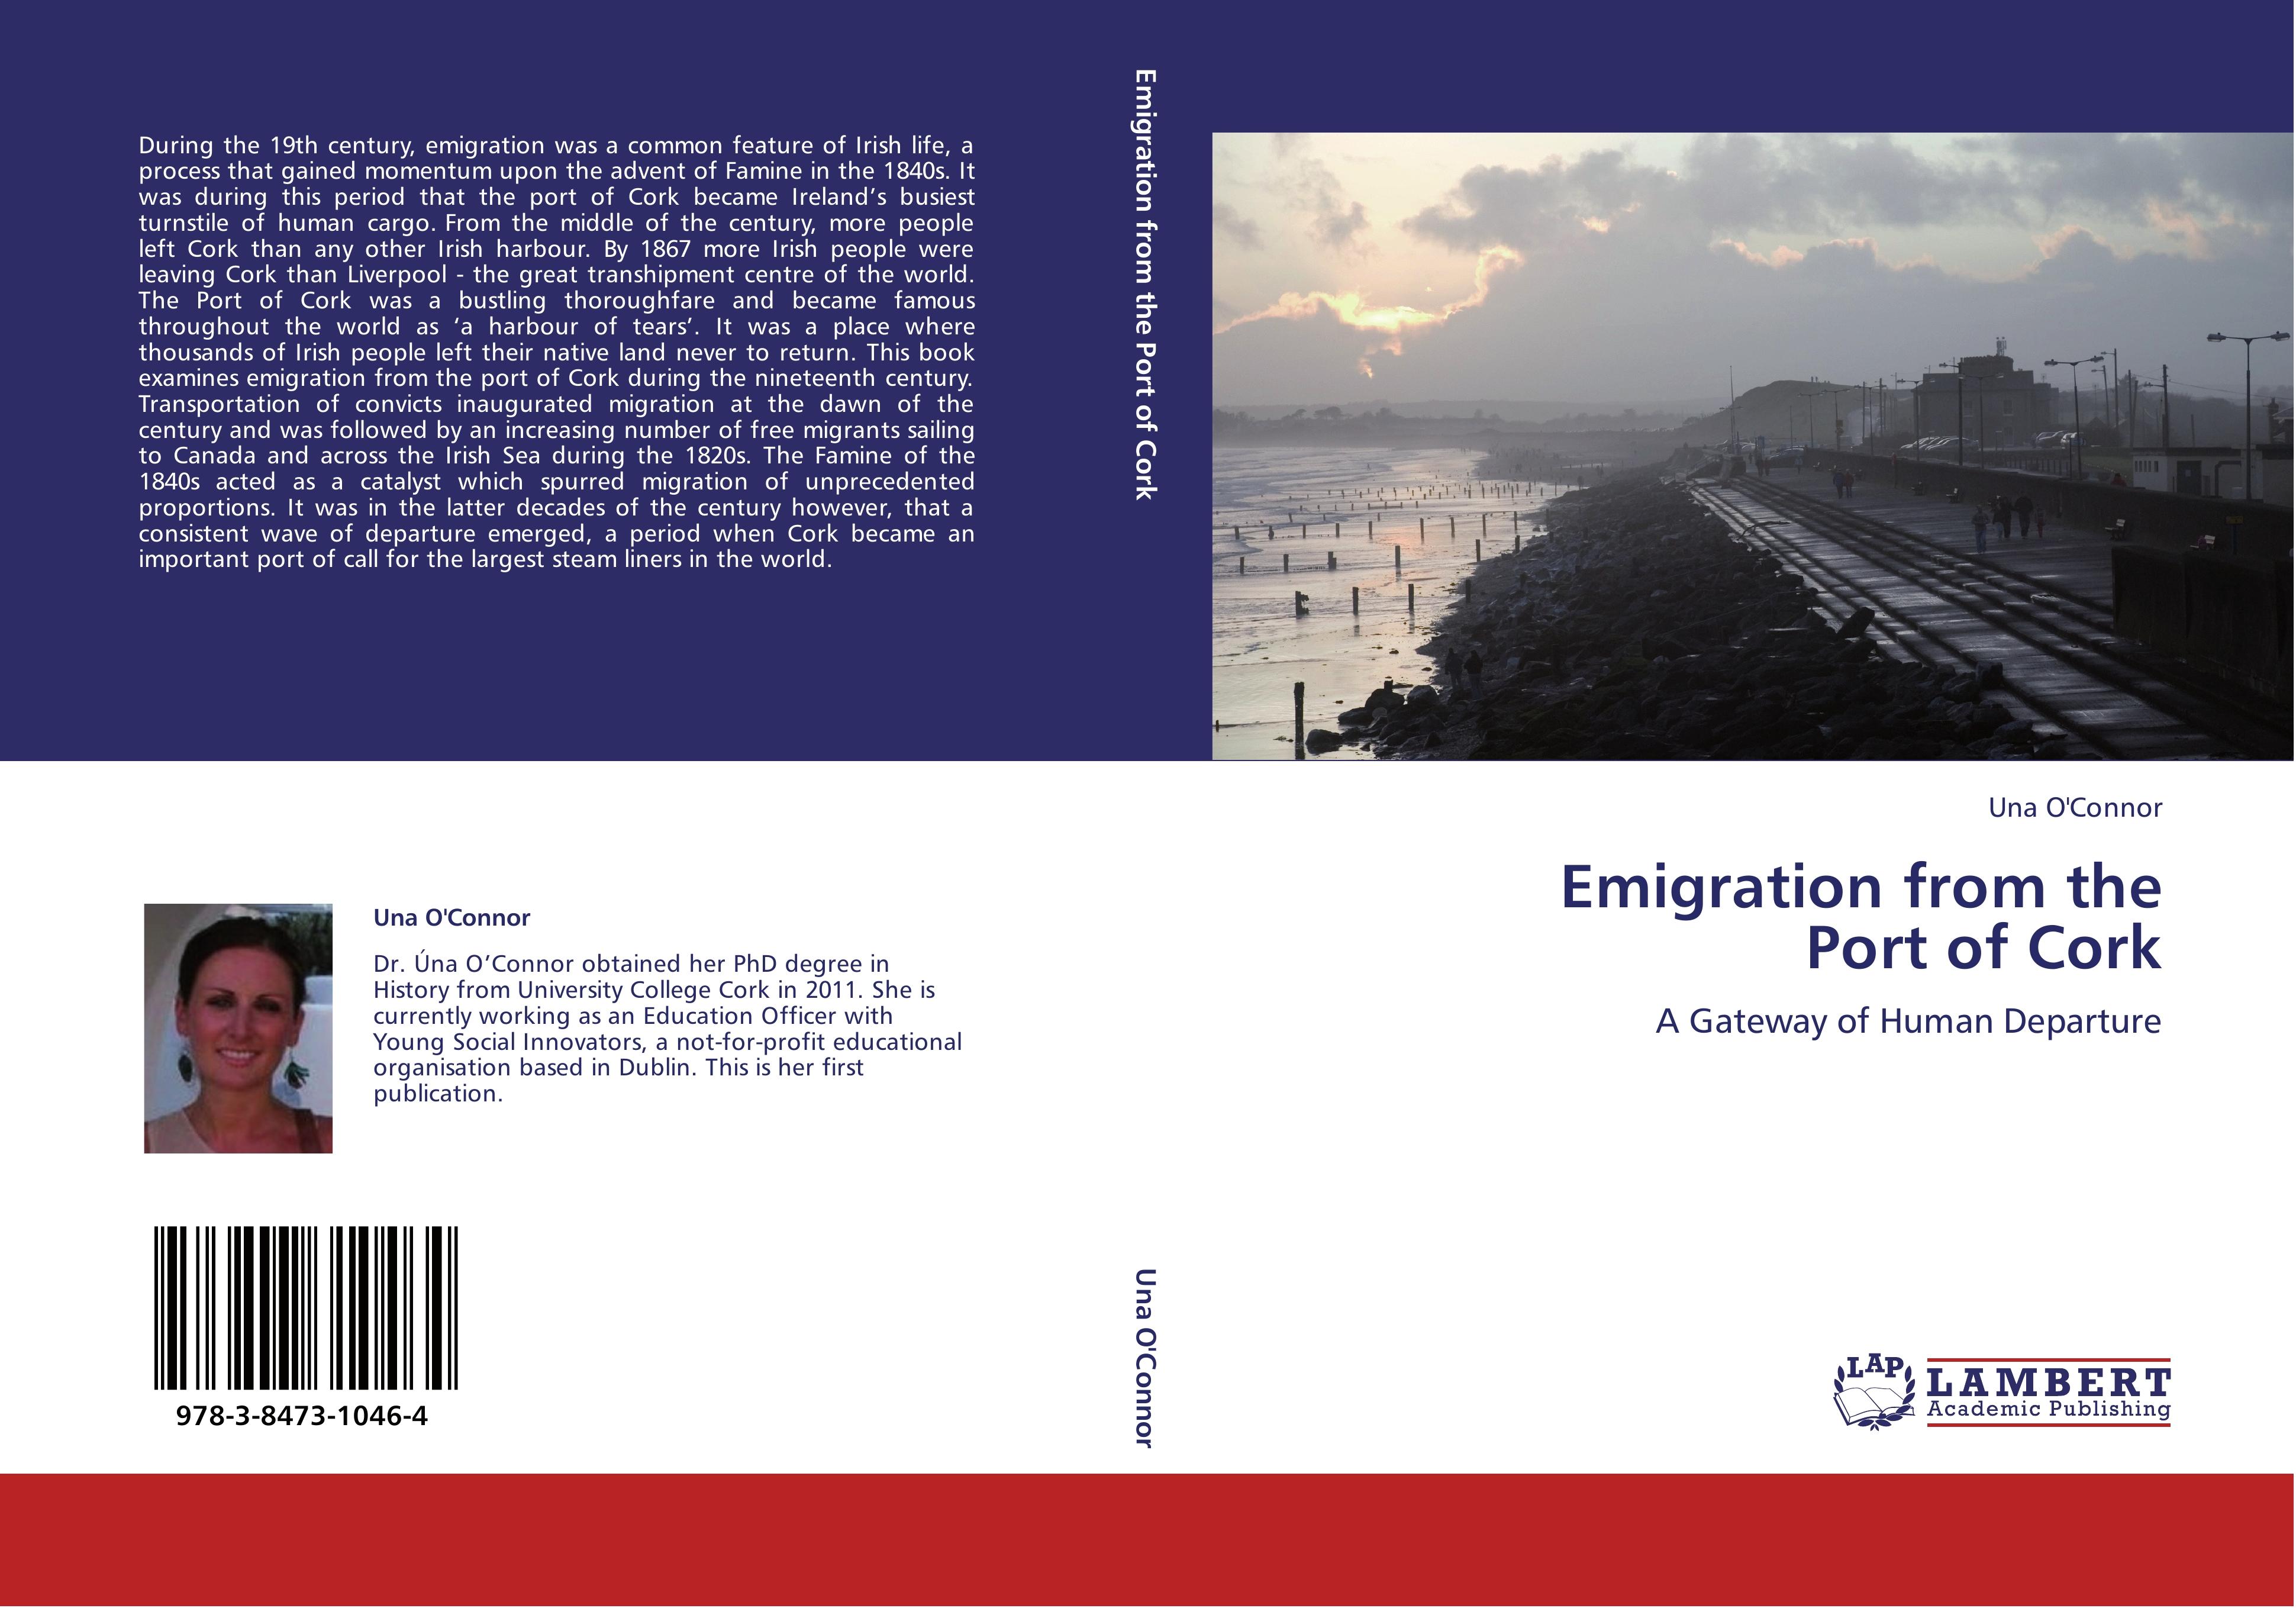 Emigration from the Port of Cork | A Gateway of Human Departure | Una O'Connor | Taschenbuch | Paperback | 308 S. | Englisch | 2012 | LAP LAMBERT Academic Publishing | EAN 9783847310464 - O'Connor, Una